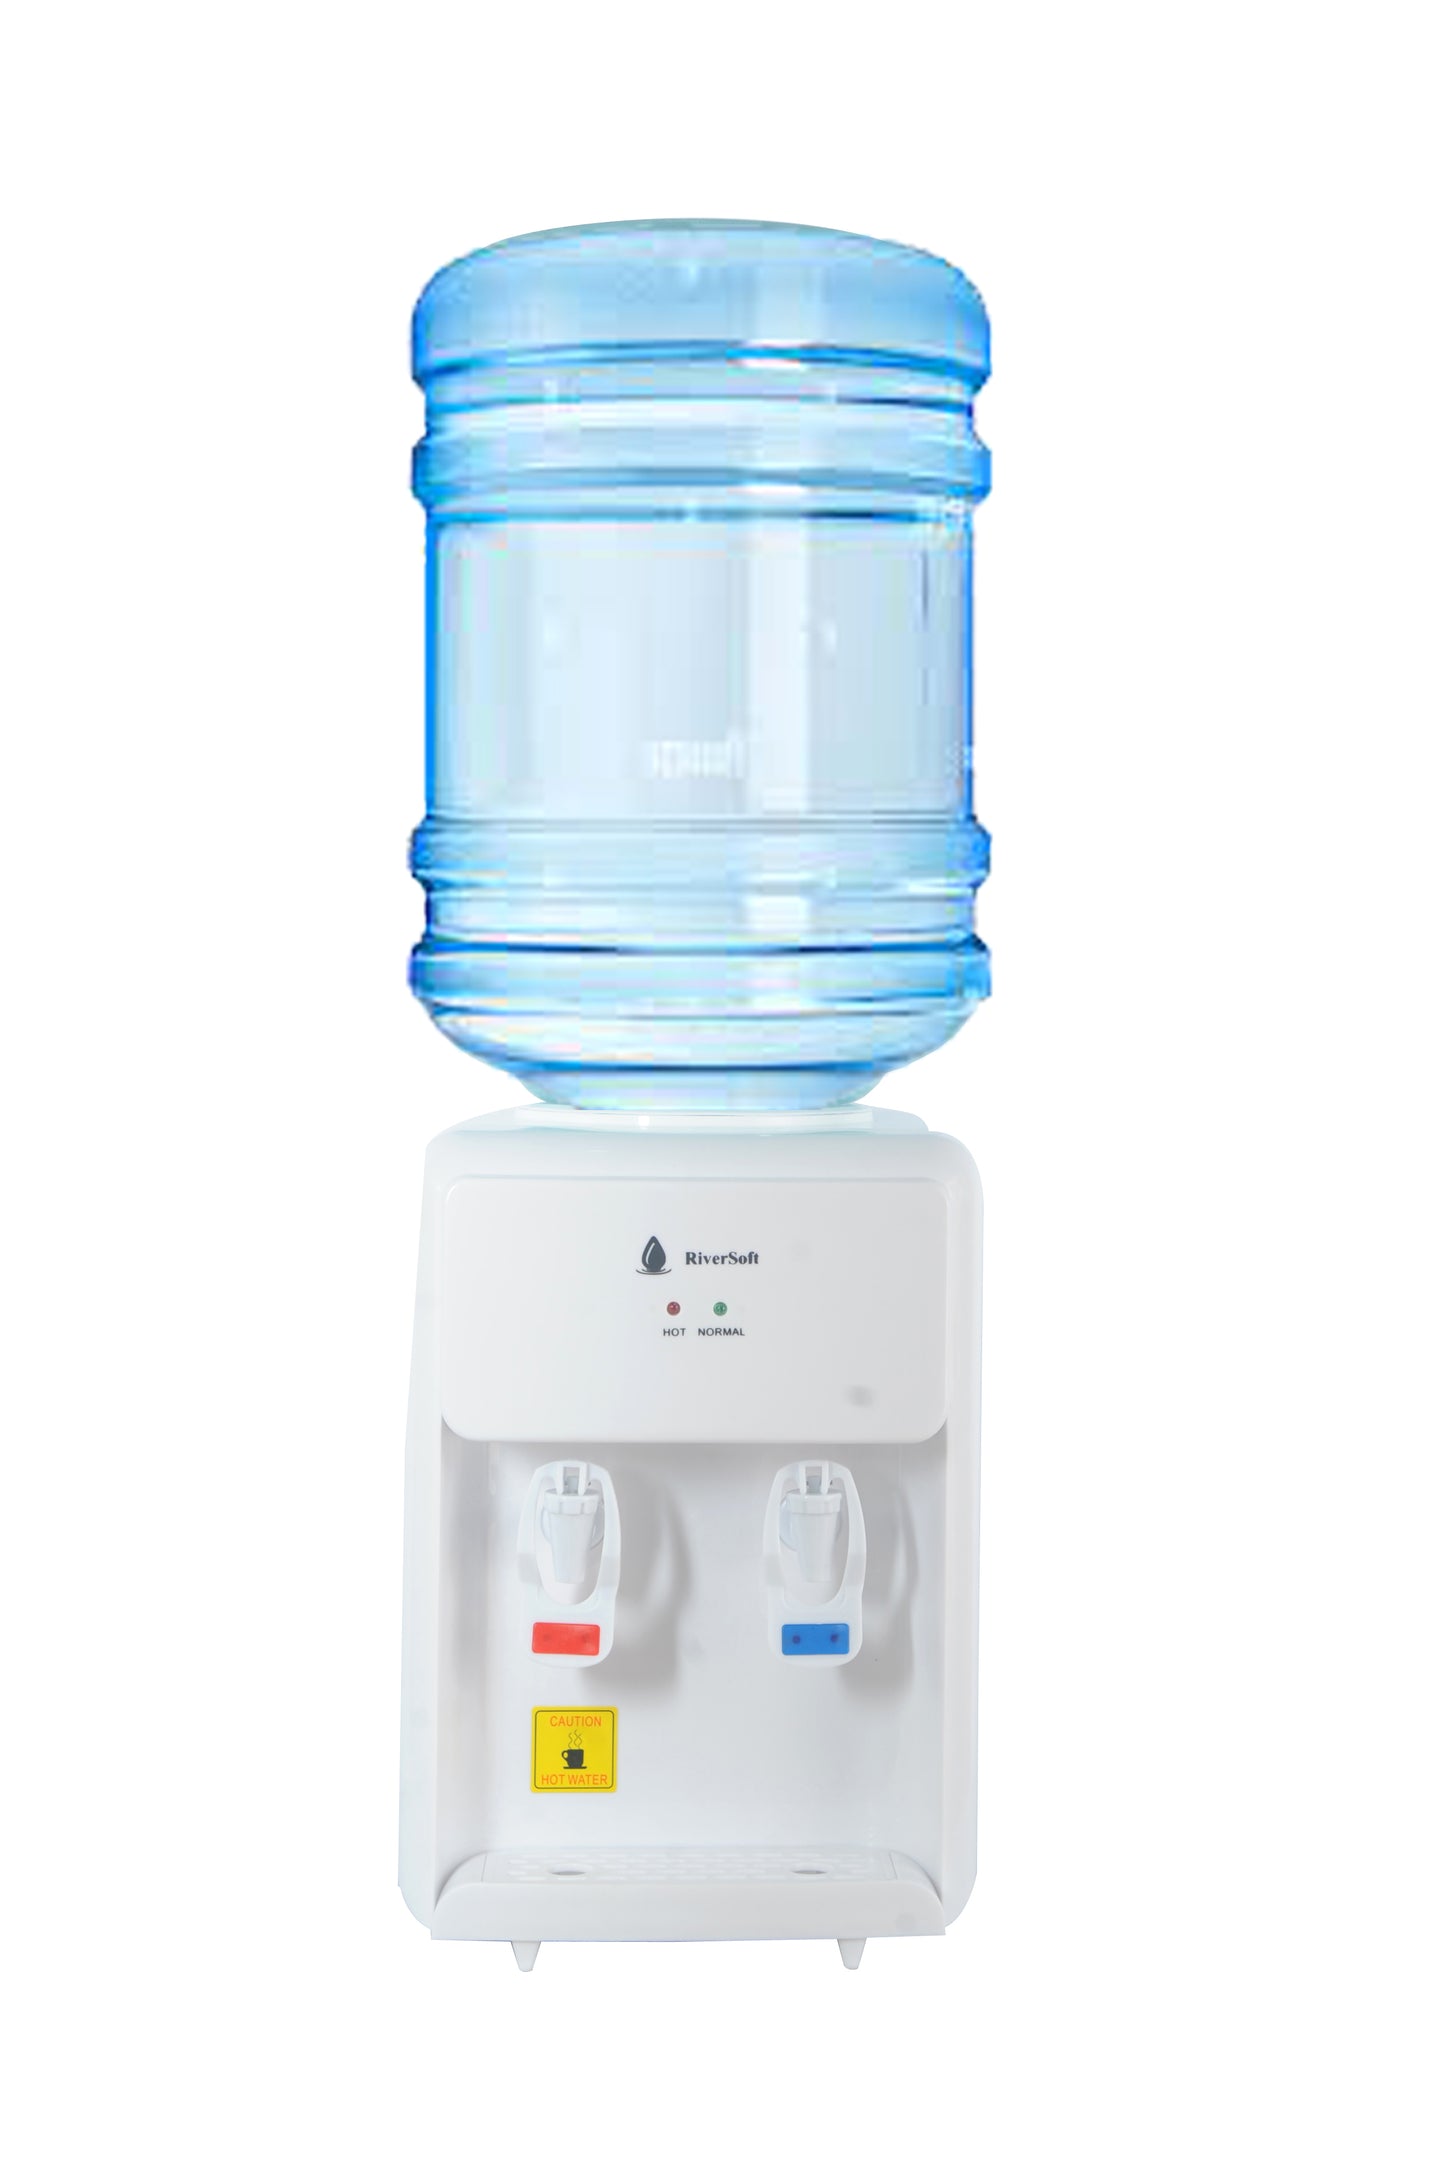 HWD-5 Hot and Normal Water Dispenser | Table Top | Does not give cold water